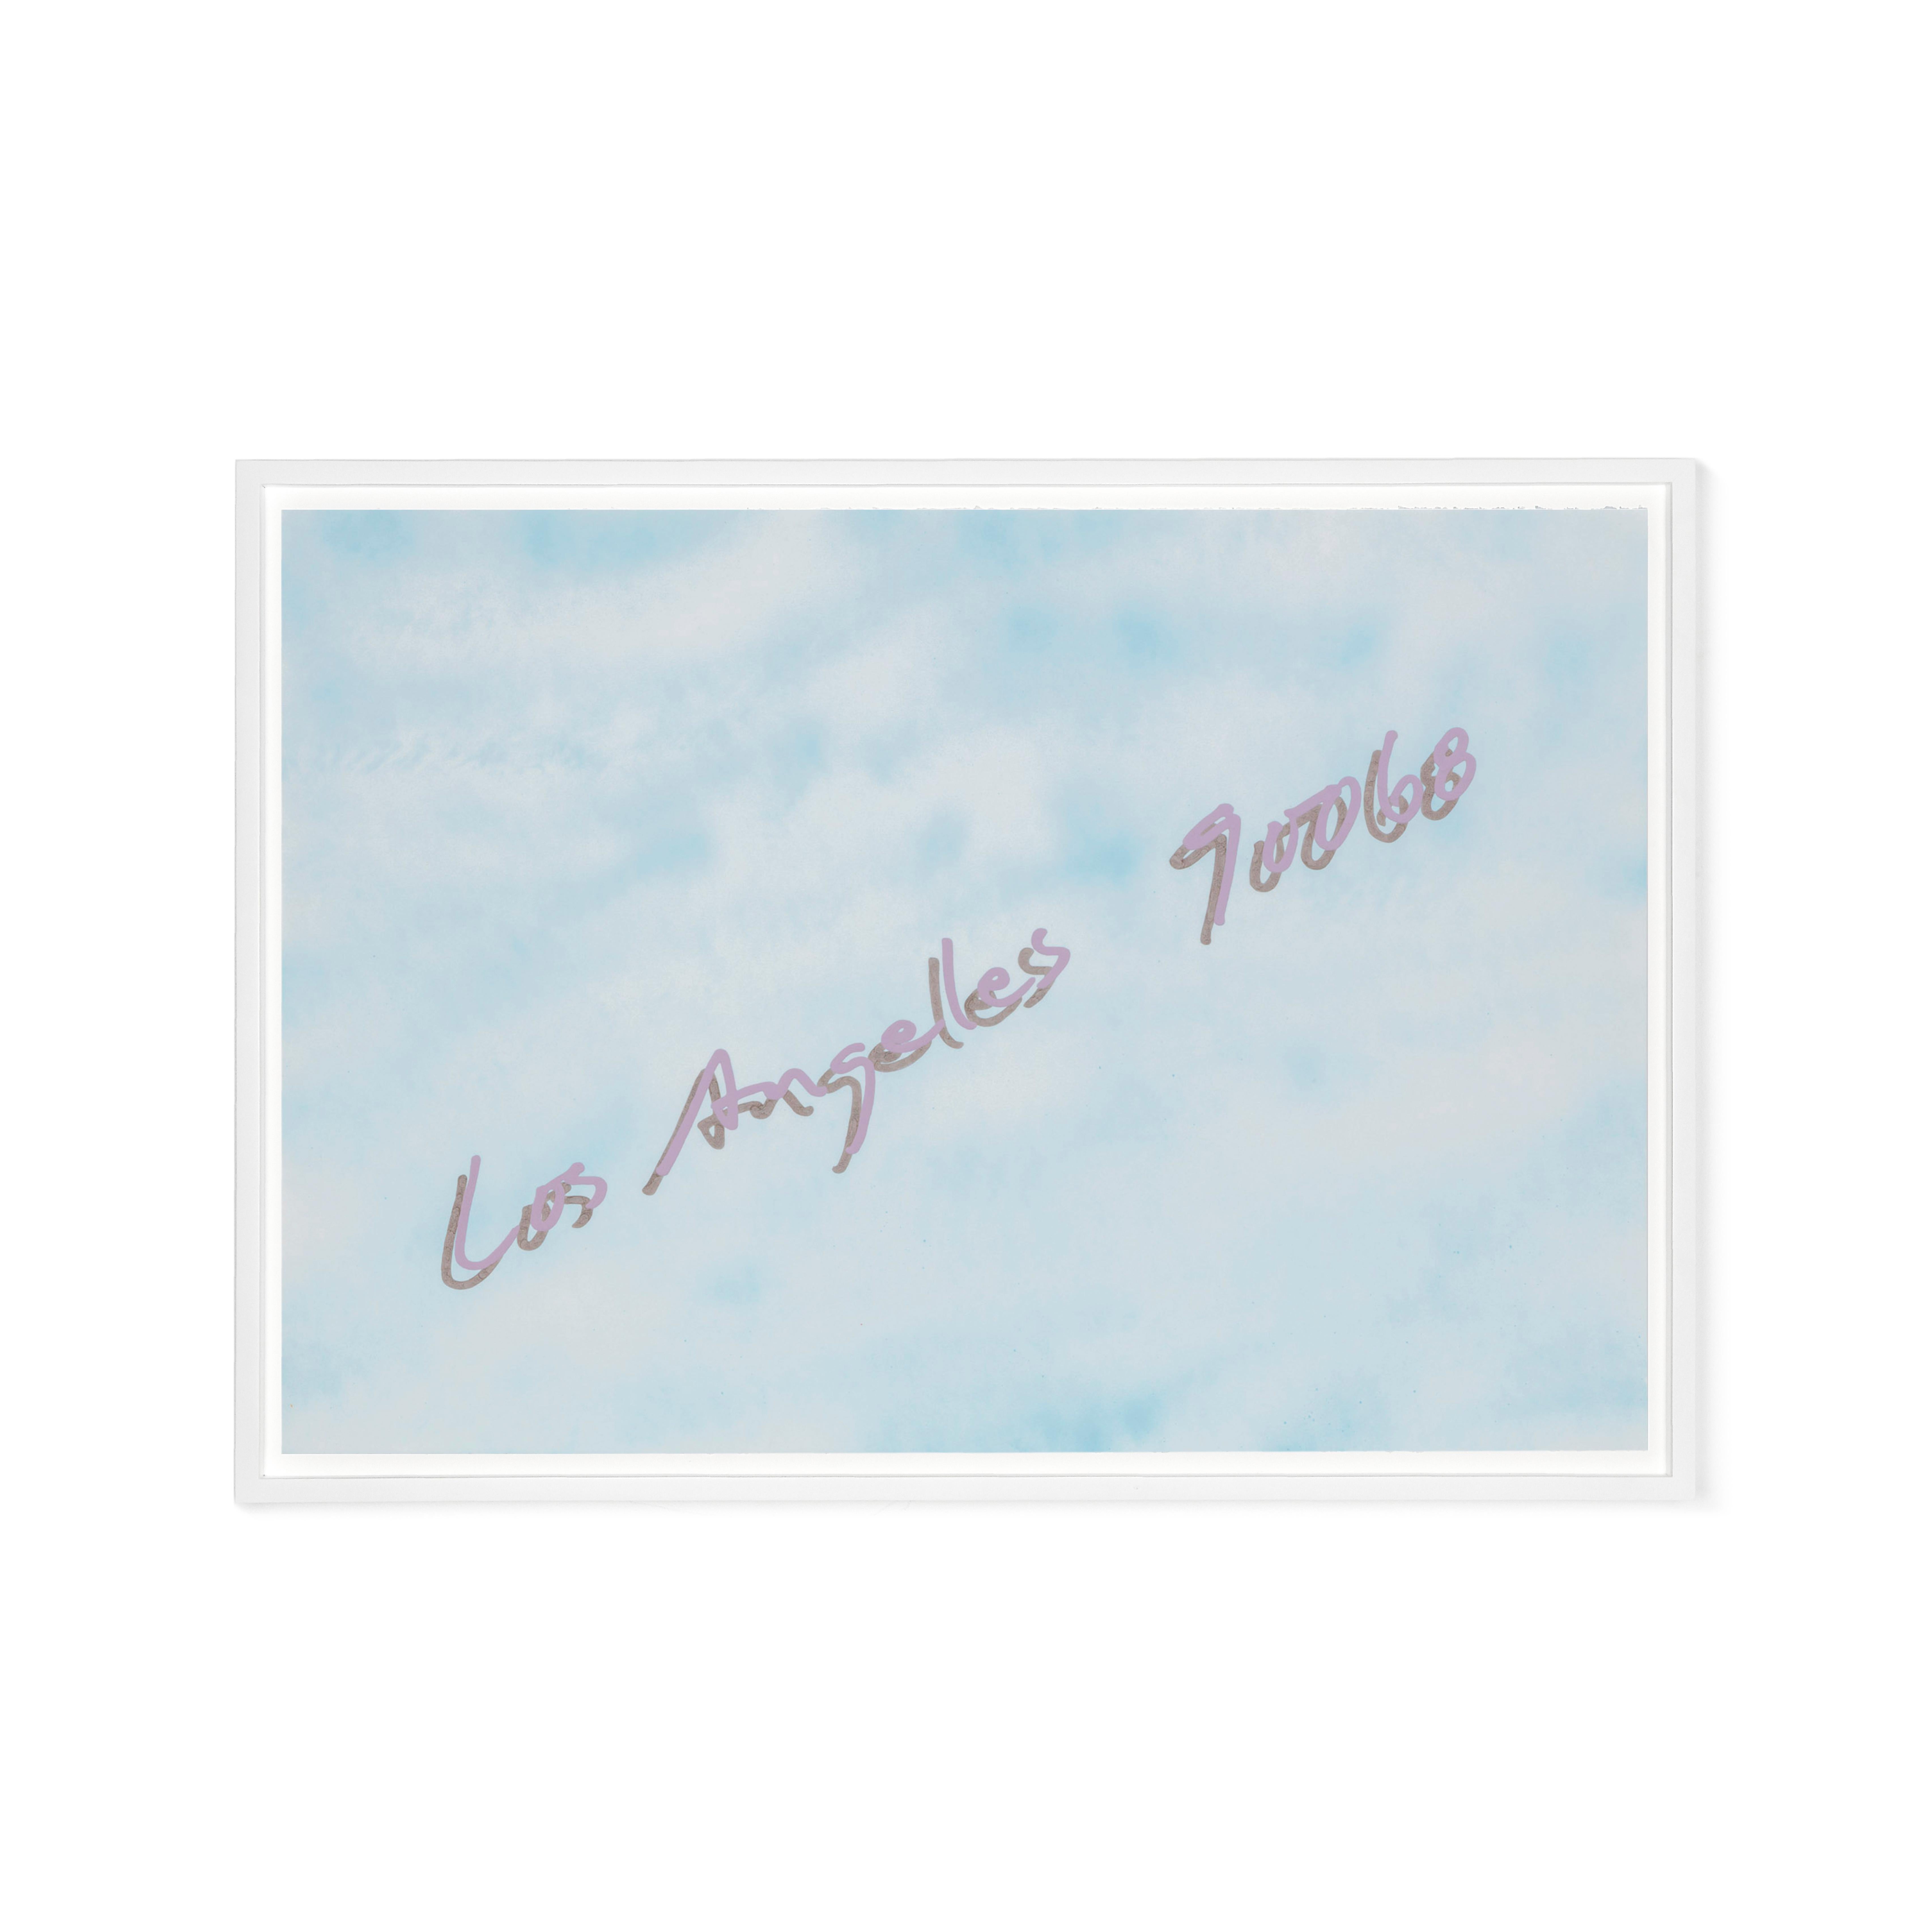 Untitled (Los Angeles 90068), Contemporary Painting On Paper, 2018  For Sale 1